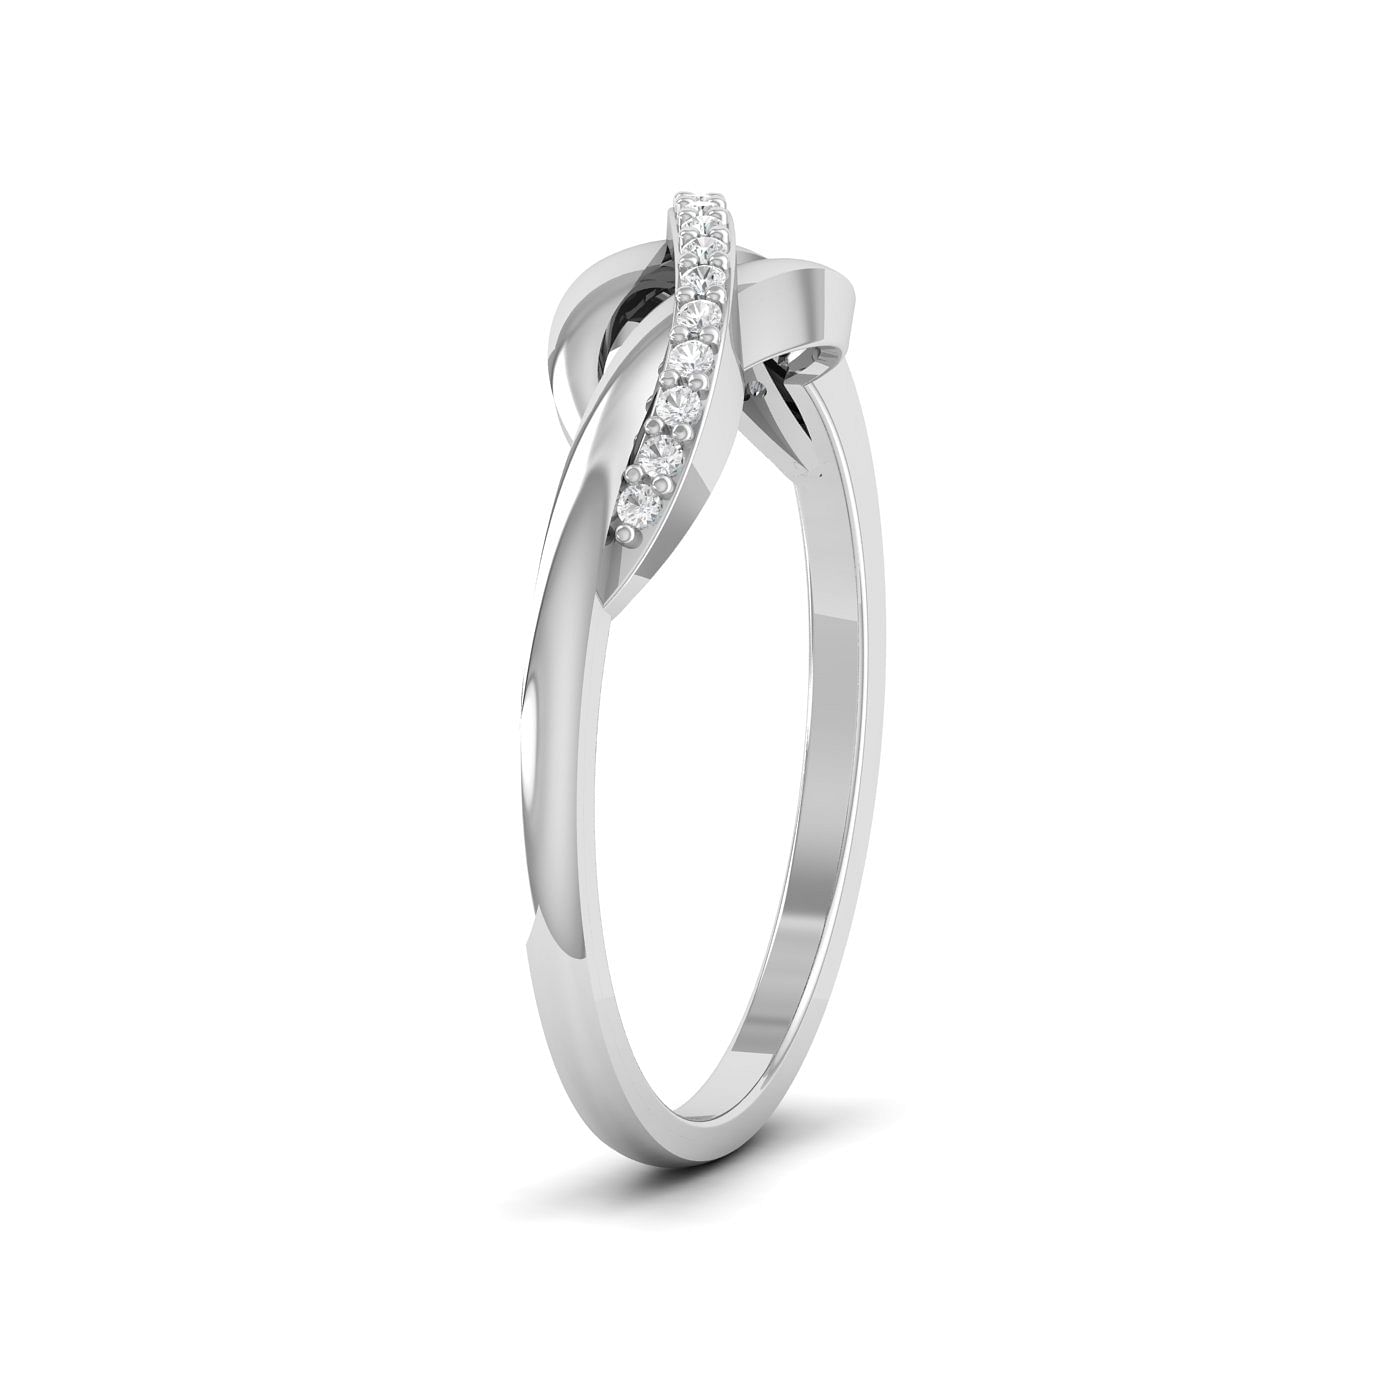 Wavy Diamond Delicate Ring White Gold For Daily Wear Or Gift